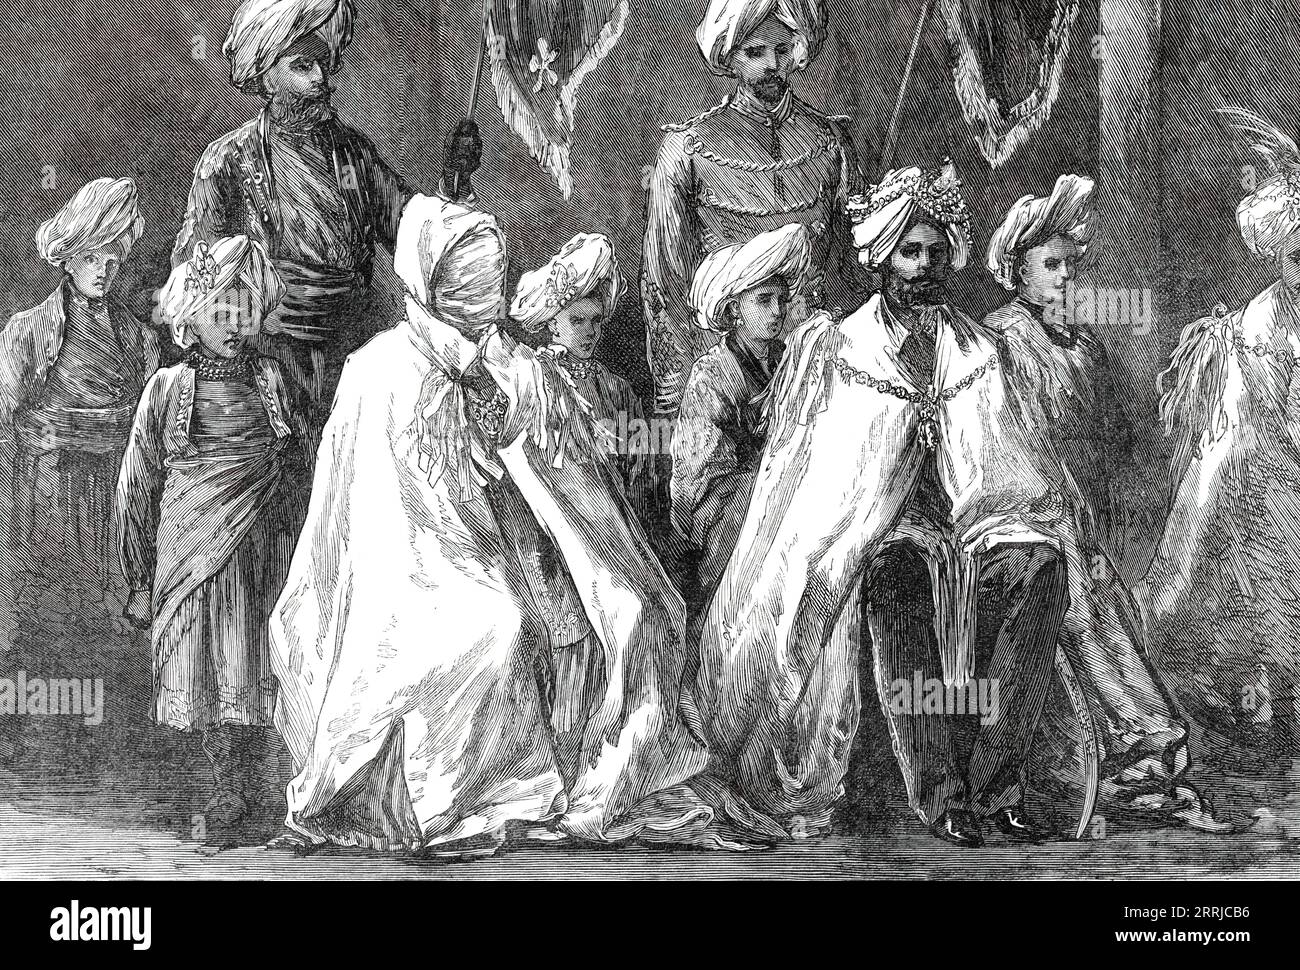 The Begum of Bhopal and the Maharajah of Puttiala, 1876. Engraving from a photograph by Shepherd and Bourne. 'The reigning family of Bhopal is Mohammedan and of Affghan race, with the title of Nawab; but during the last half century the widow of a Nawab has more than once been permitted to succeed, and the inheritance of the last Nawab passed to an infant daughter. The people nominally under her sway are of mixed race, but chiefly Hindoo, and their number exceeds half a million...Mohender Singh, the Maharajah of Puttiala, G.C.S.I., the wearer of a splendid jewelled head-dress...[is] sitting be Stock Photo